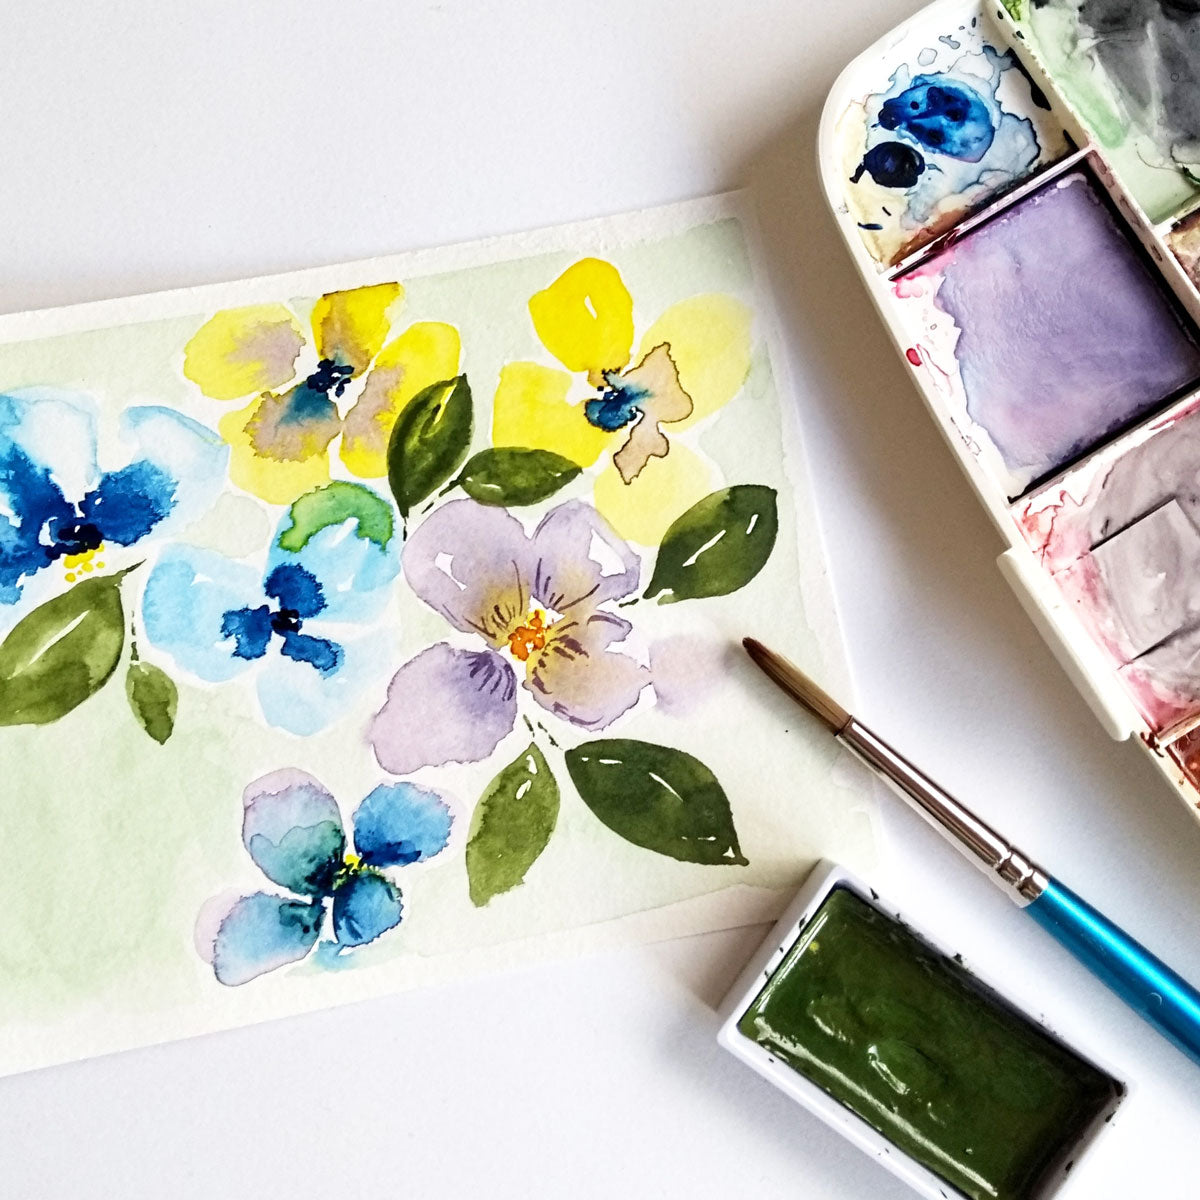 Five Patch Design watercolor painting of pansies